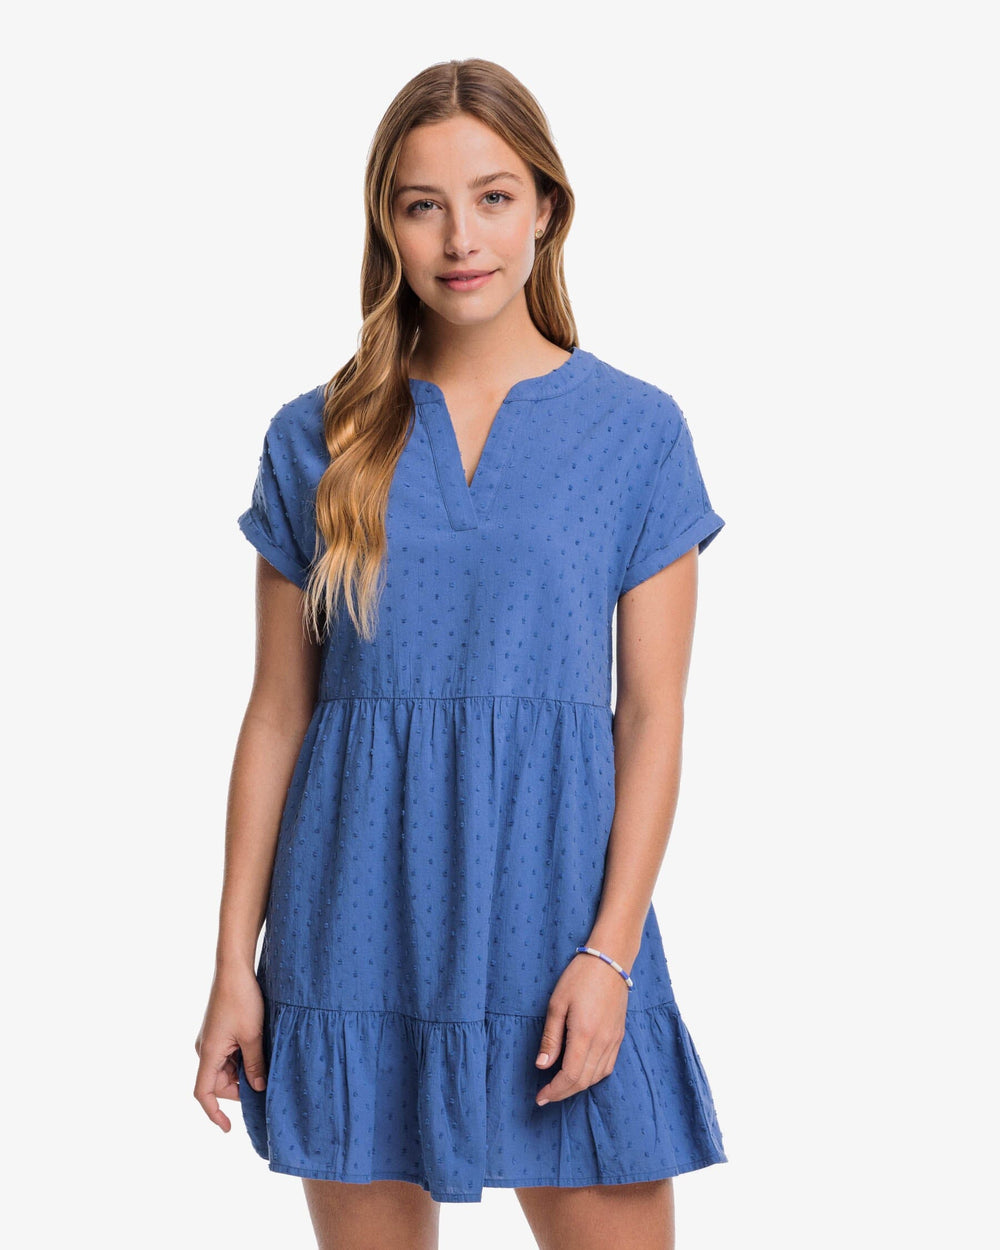 The front view of the Southern Tide Colette Swiss Dot Dress by Southern Tide - Seven Seas Blue